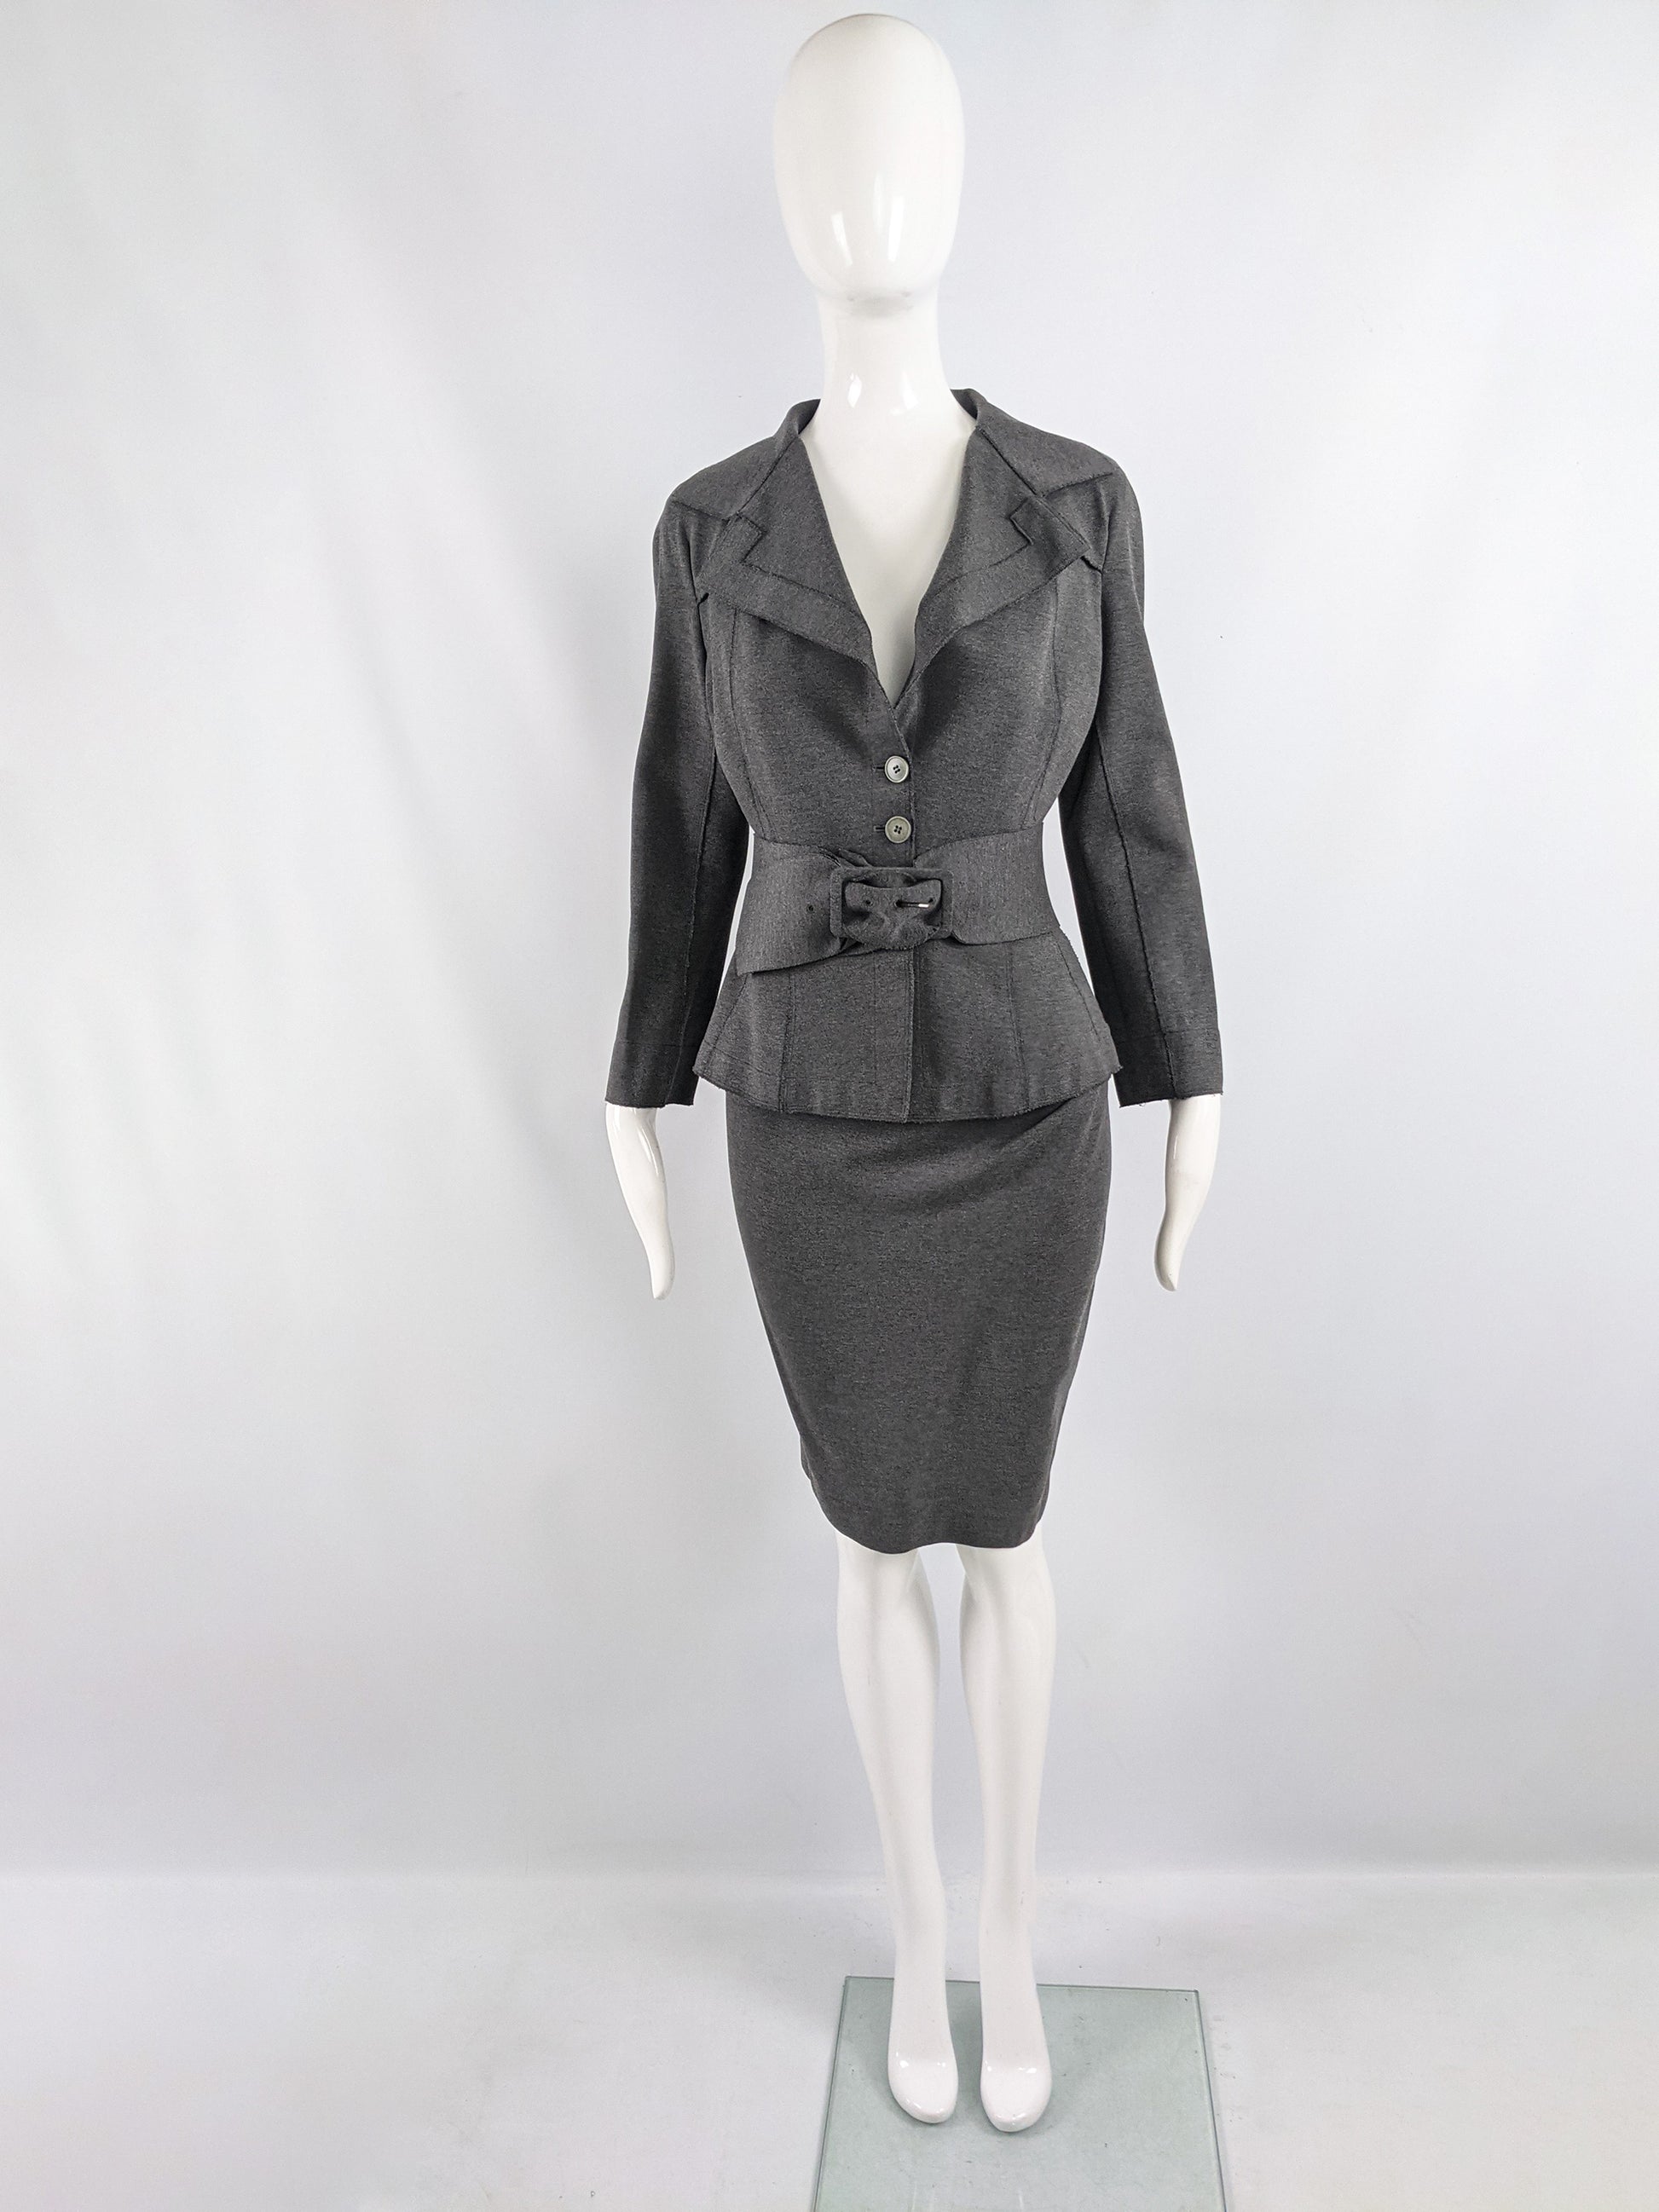 A 1940s style vintage Donna Karan skirt suit in a dark grey stretch knit fabric.